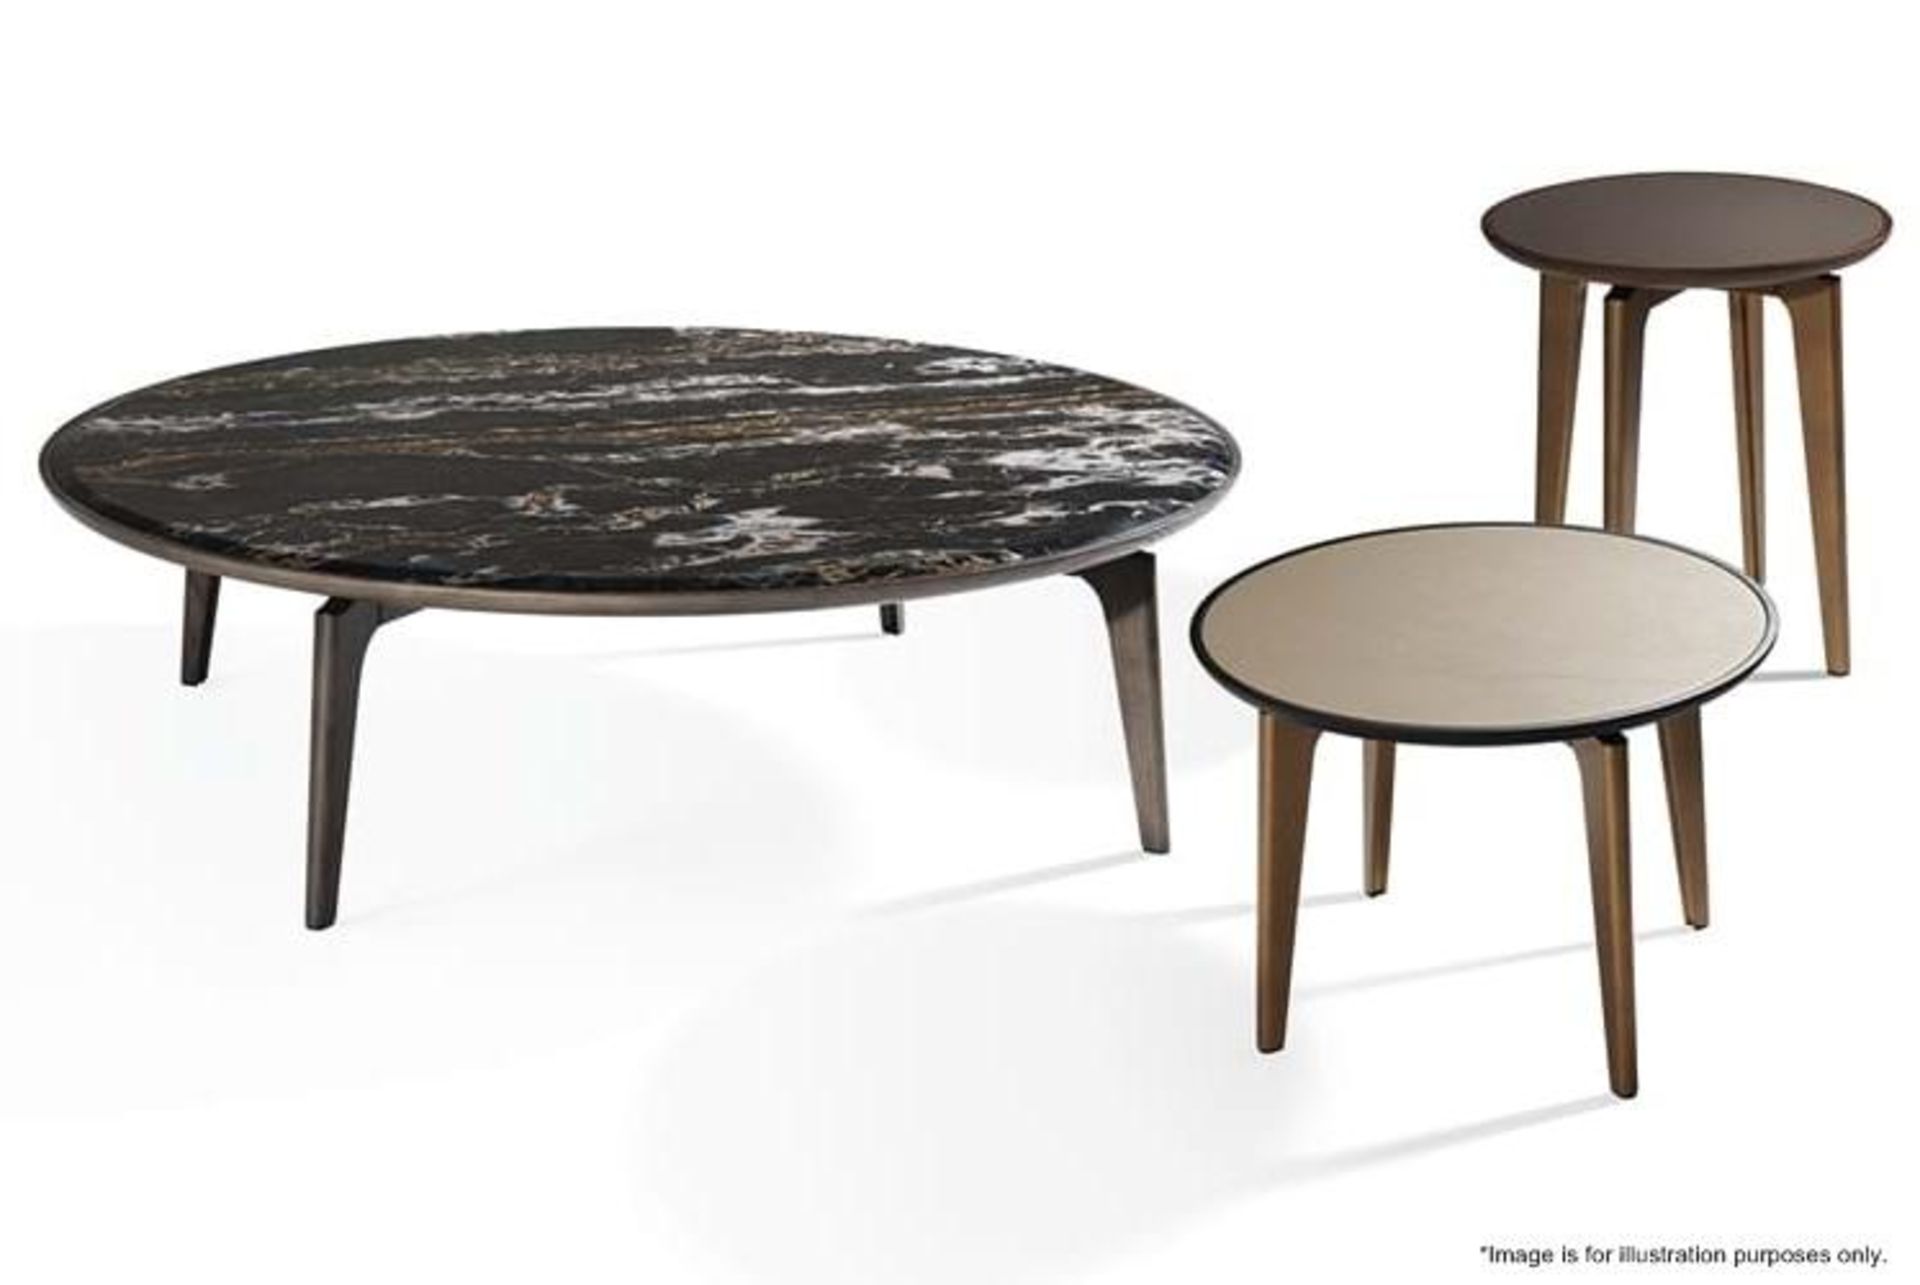 1 x Giorgetti 'Blend' Designer Marble Topped Table With A Bronzed Metal Base - Original RRP £1,919